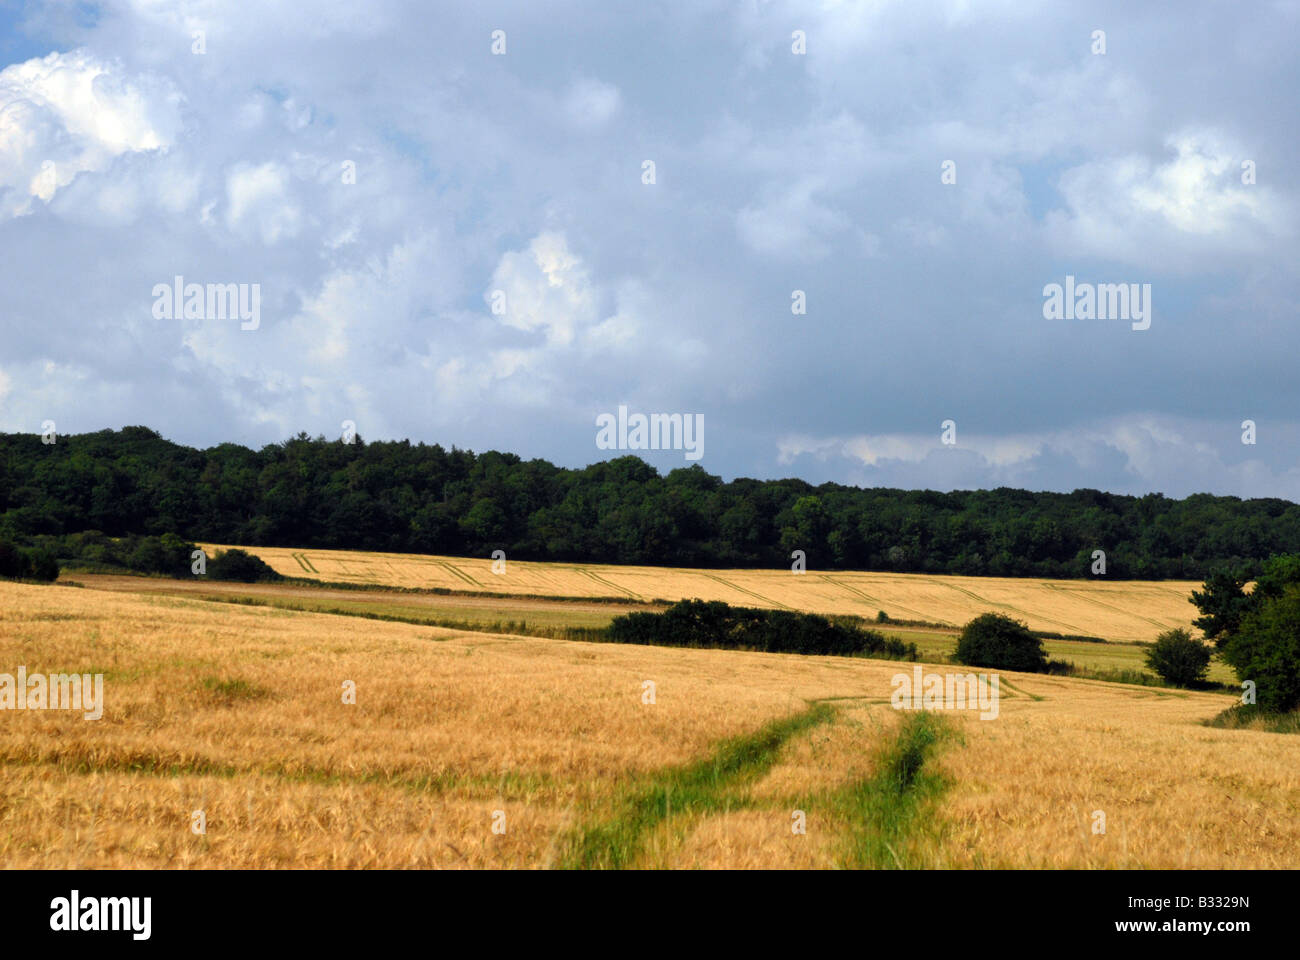 rural scene of a field of ripe barley against a leaden grey sky surrounded by woodland Stock Photo